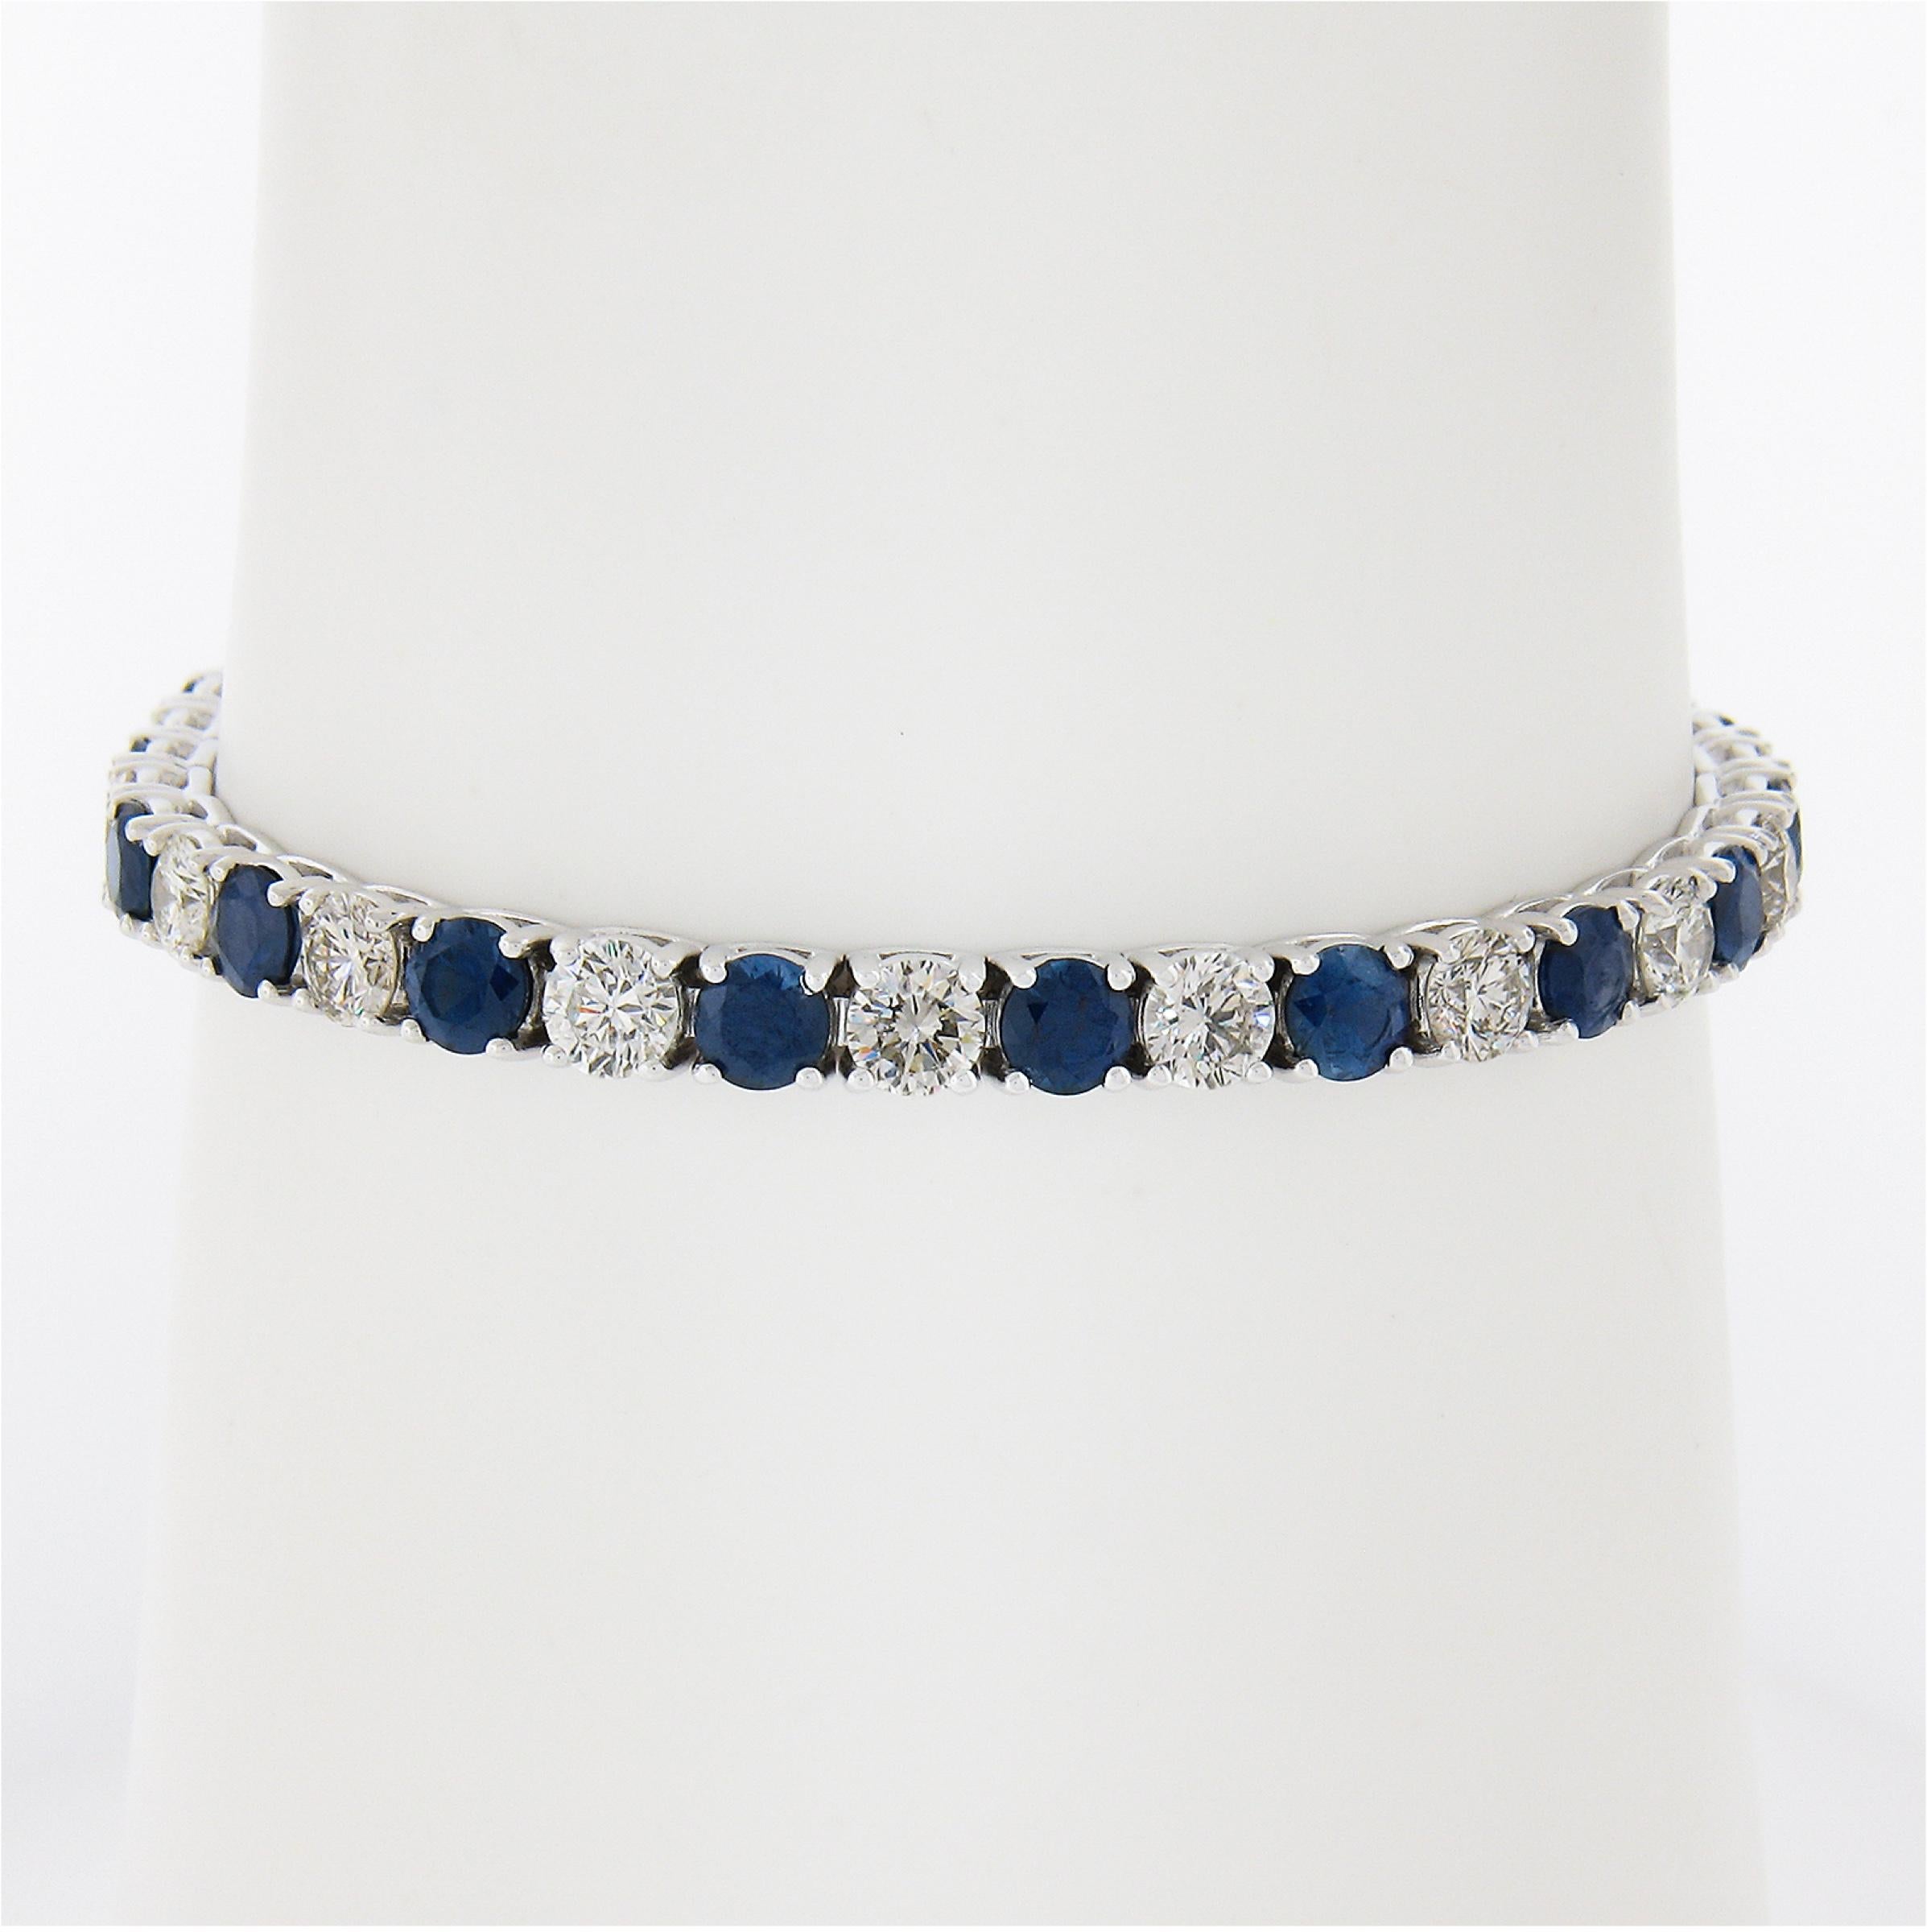 Here we have a breathtaking new bracelet crafted from solid 18k white gold and features alternating diamonds and sapphires in a straight line design. The diamonds are large round brilliant cut stones totaling exactly 5.31 carats in weight. These